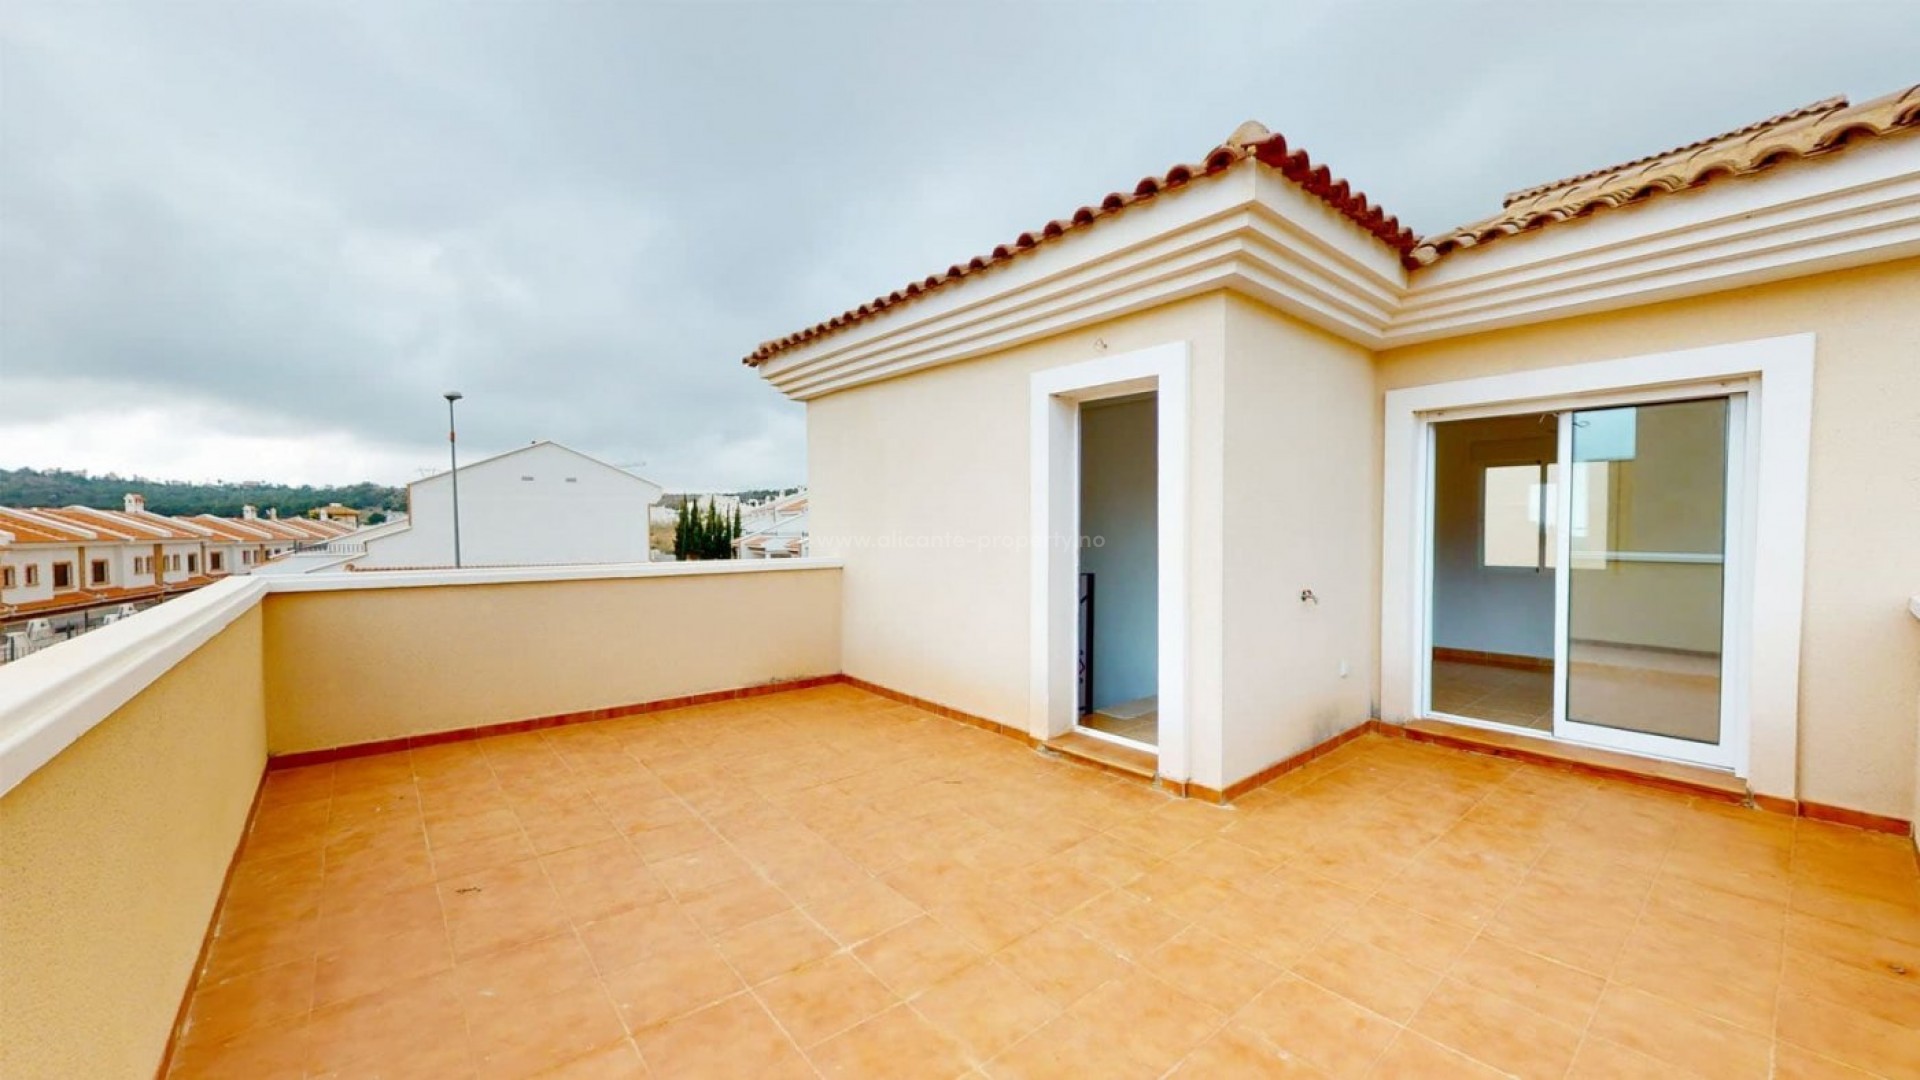 Turnkey townhouses in Cerro del Sol, San Miguel de Salinas, 3 bedrooms, 2 bathrooms, 6 km from Torrevieja, large gardens, private sun terraces, communal pool